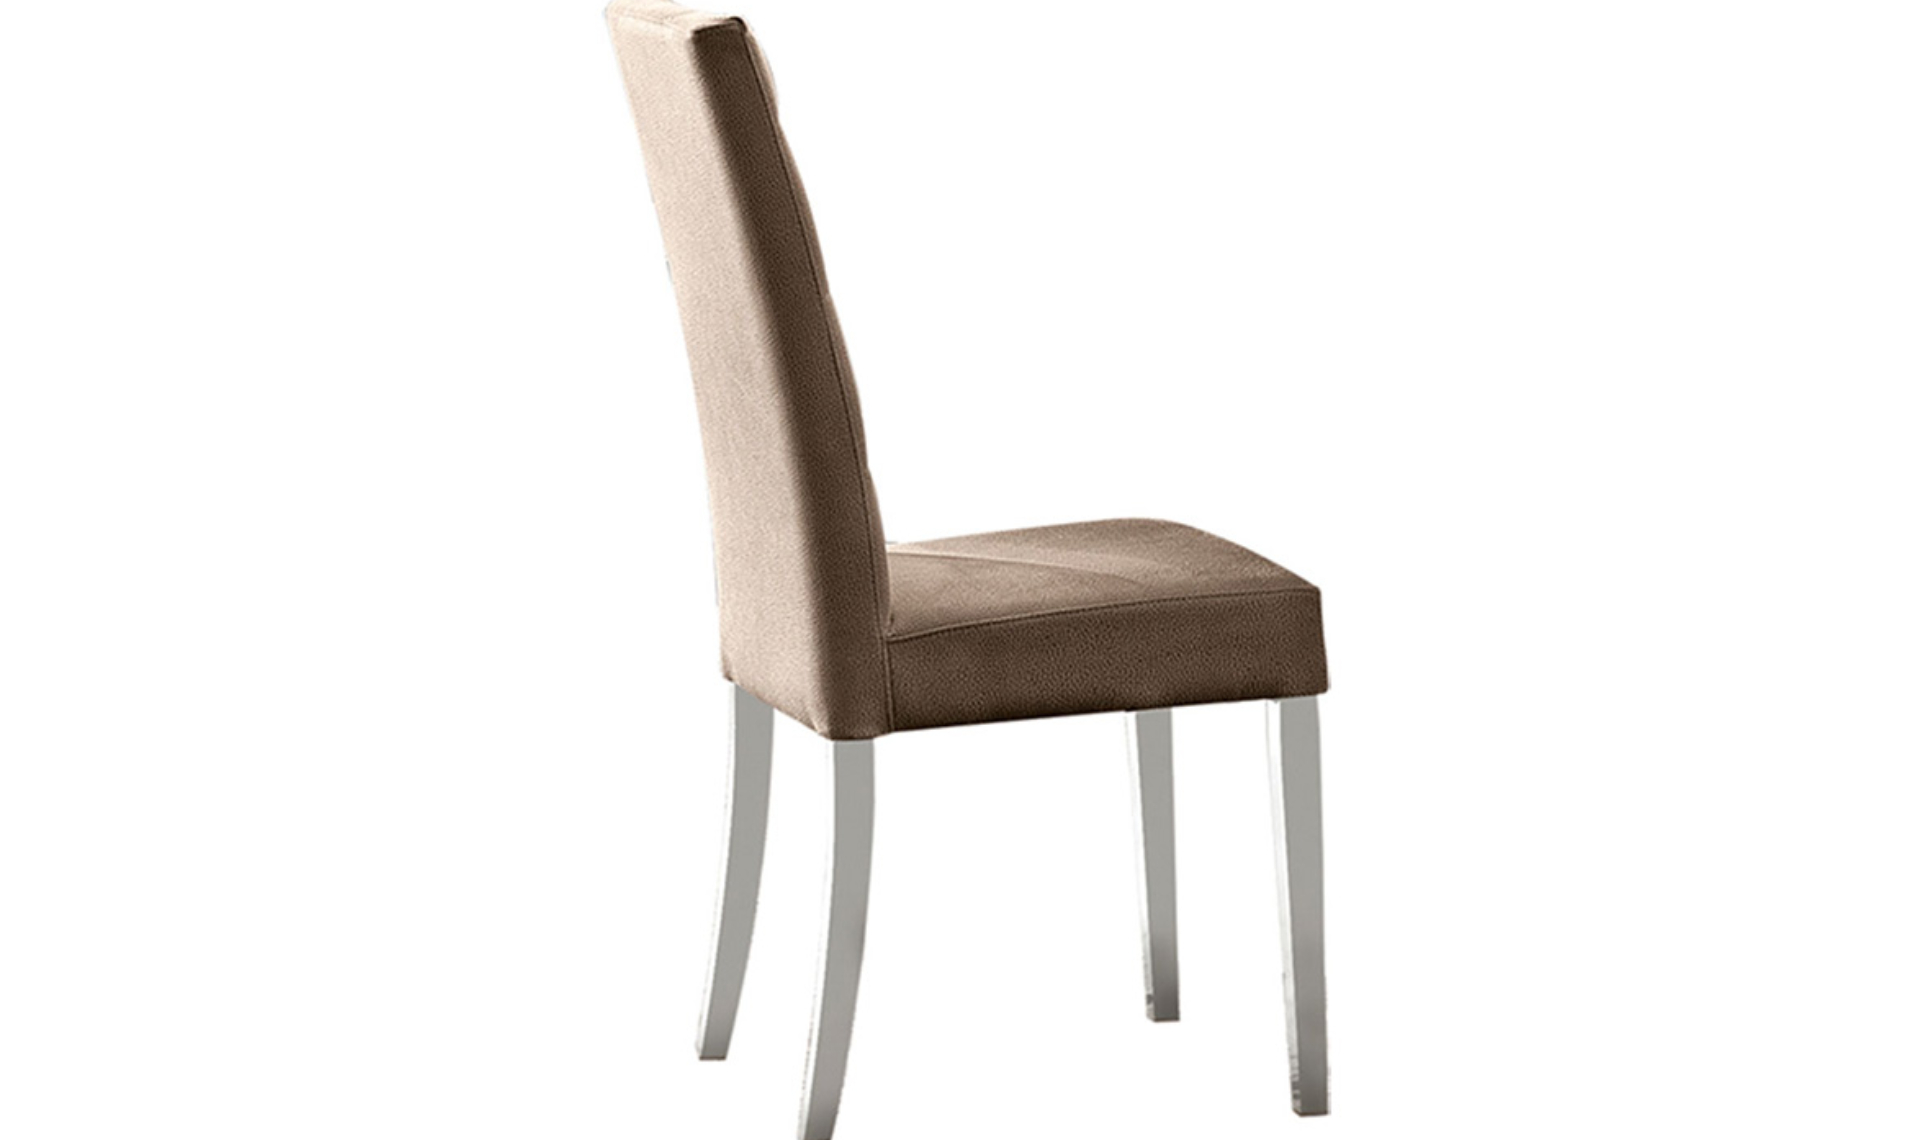 dama bianca side chair in eco leather 1